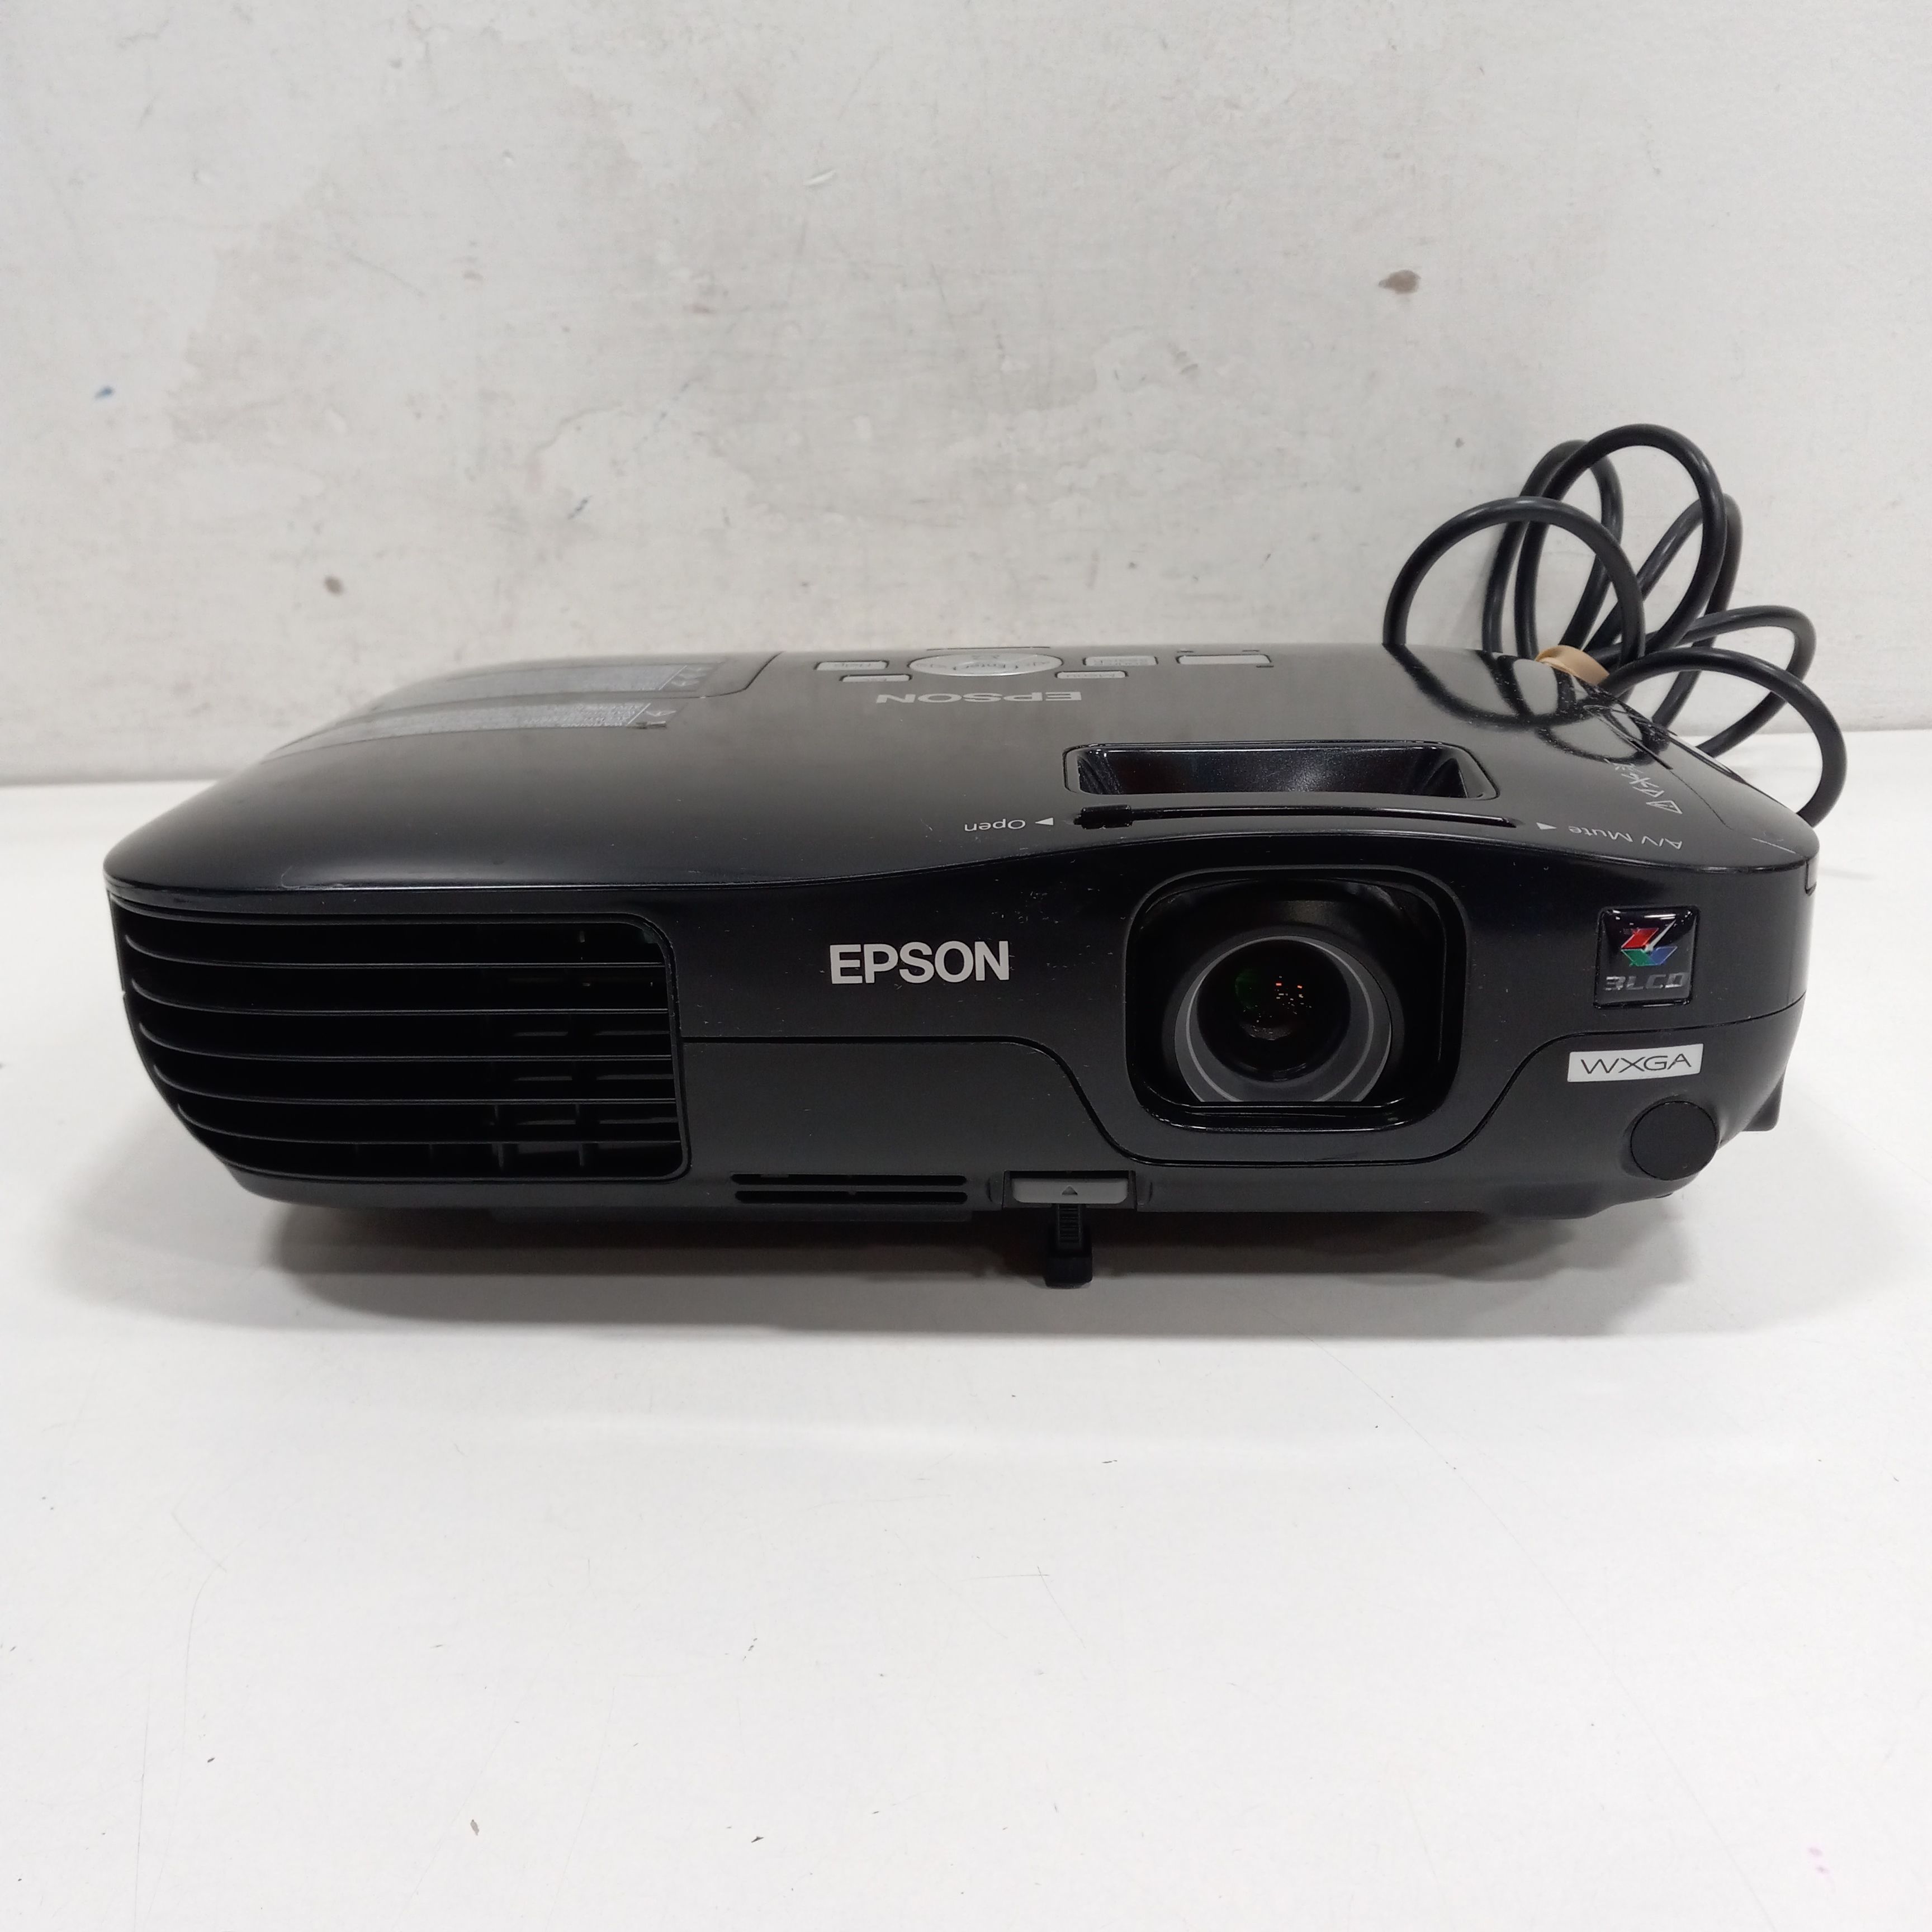 Buy Black Epson/ Projector for USD 99.99 | GoodwillFinds